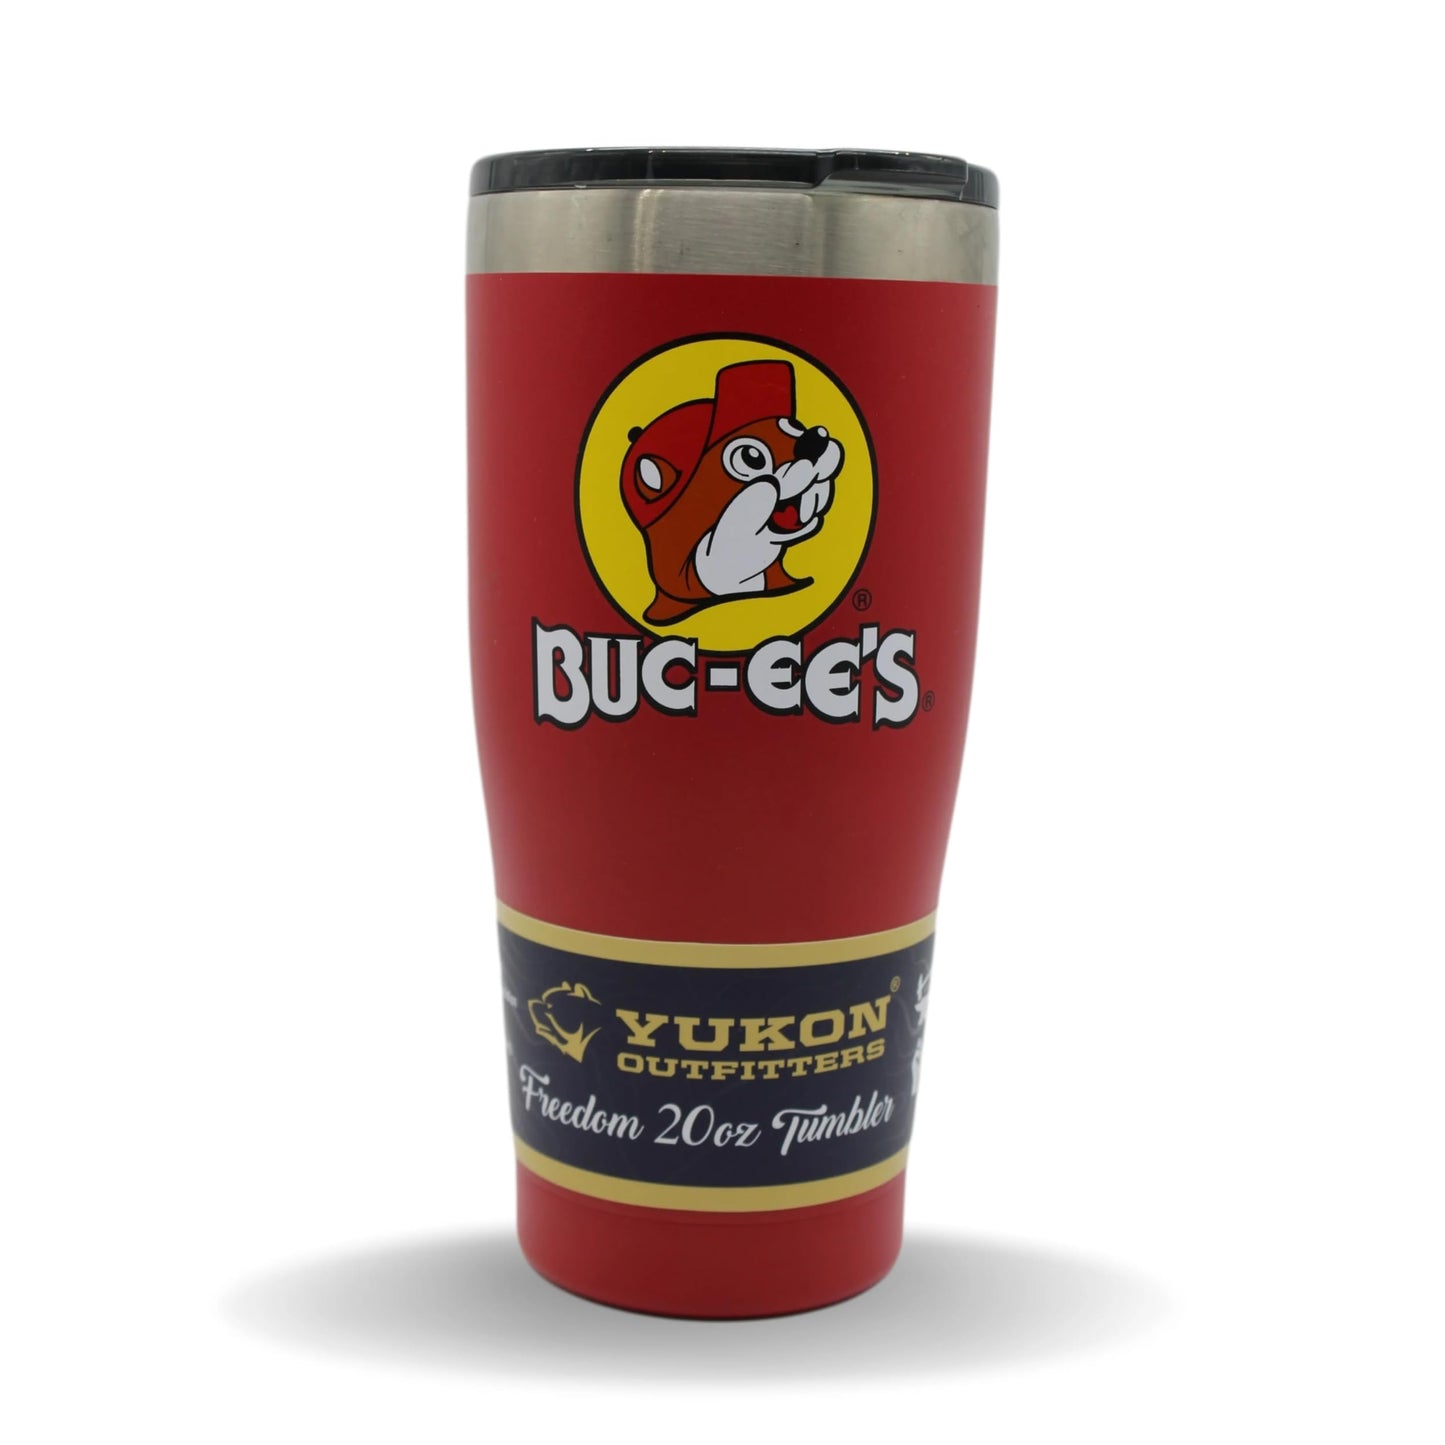 Buc-ee's Red Stainless Steel Tumbler With Bucky the Beaver, Double Wall Vacuum Insulated, 20 Ounces